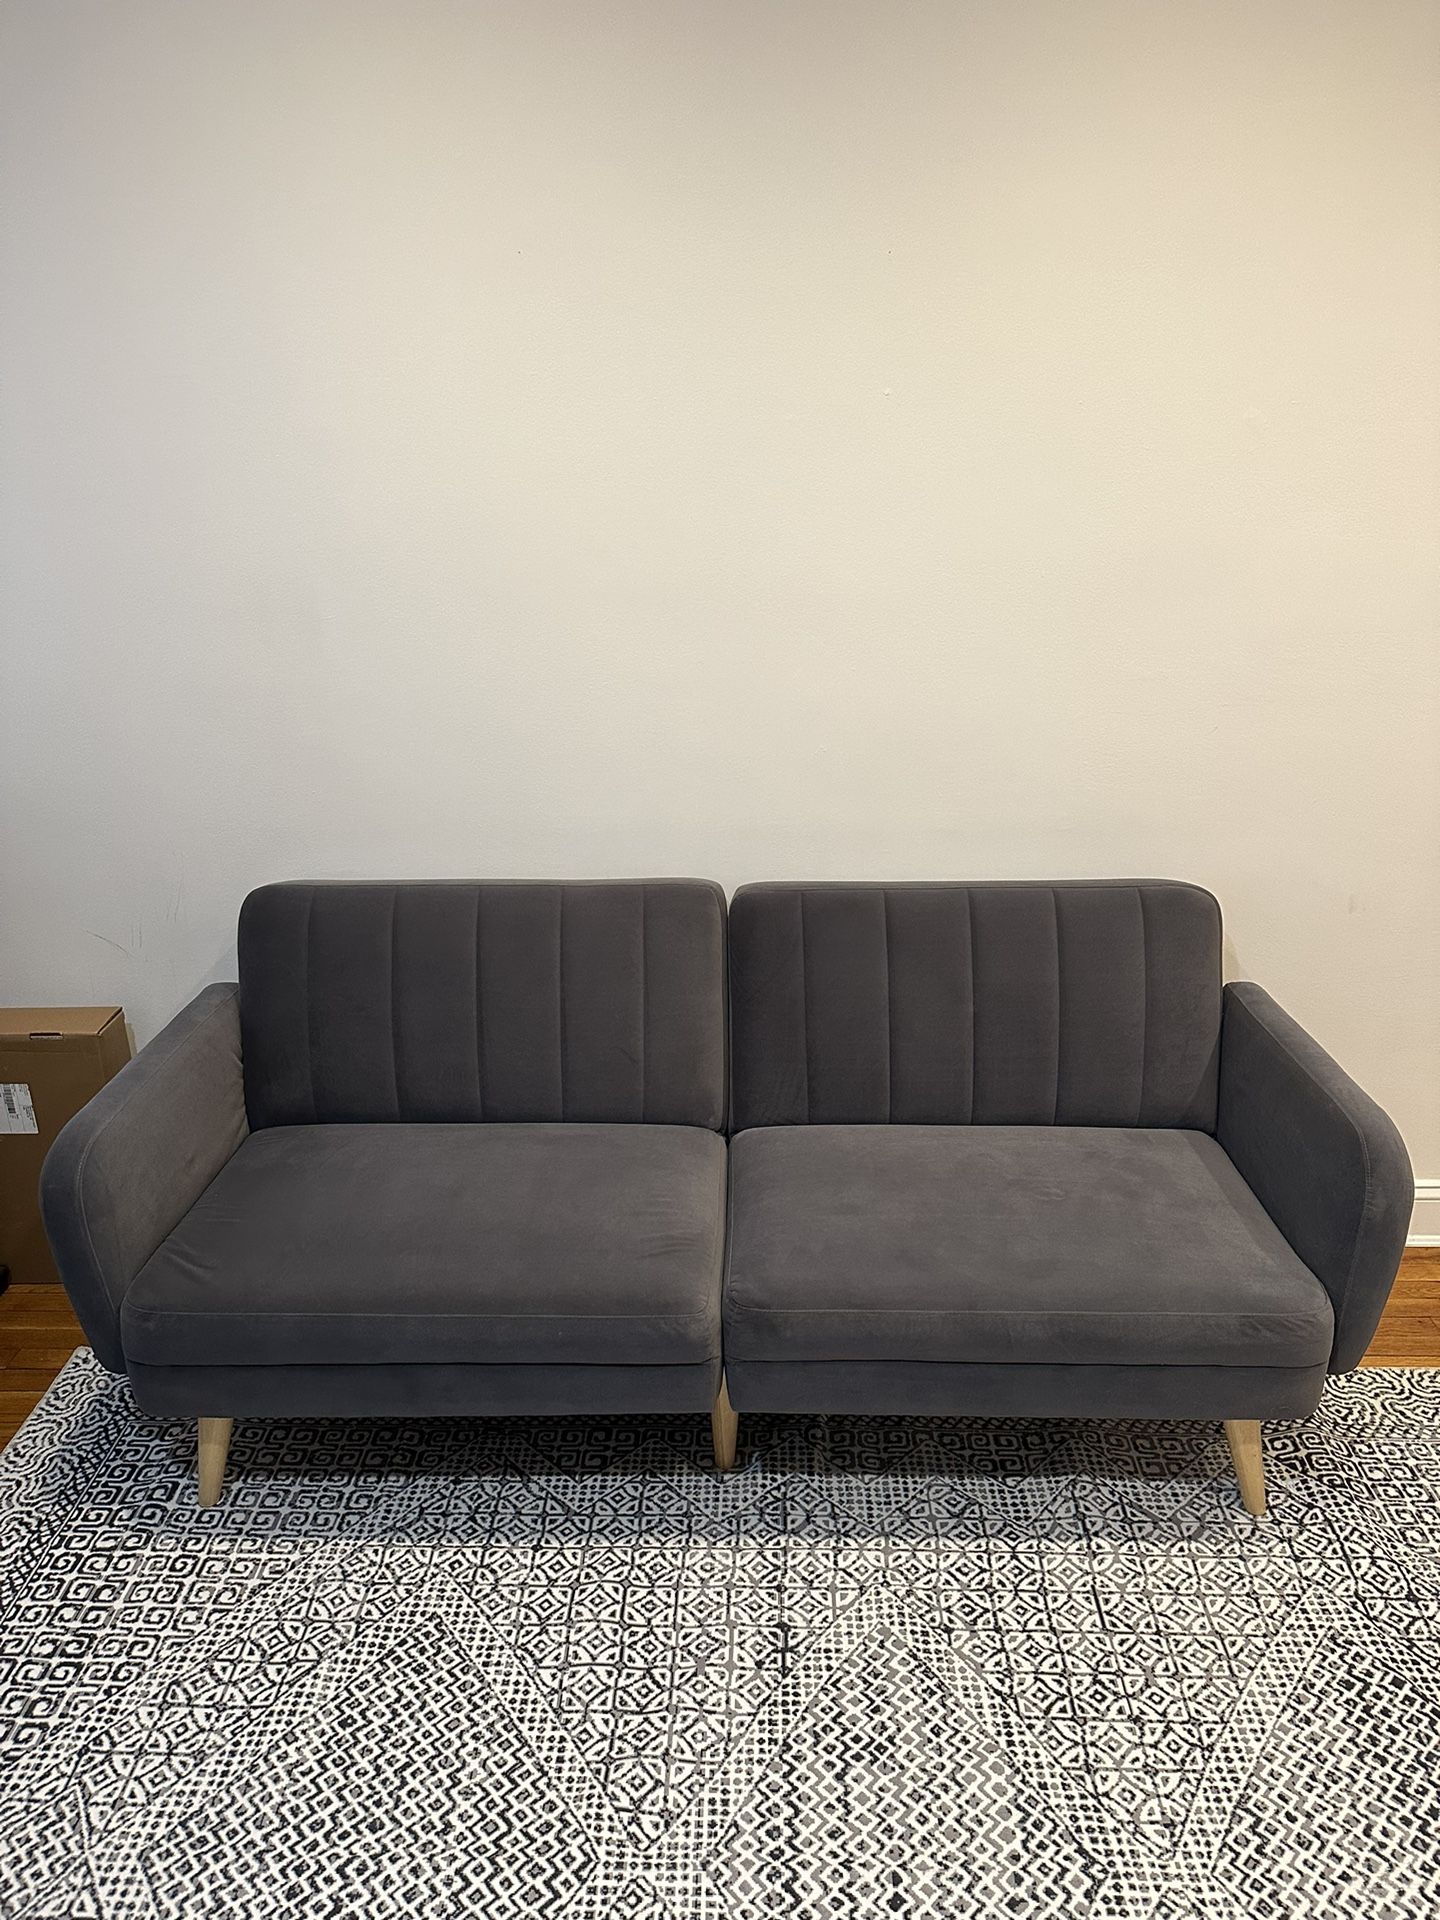 Futon couch - Great Condition!!